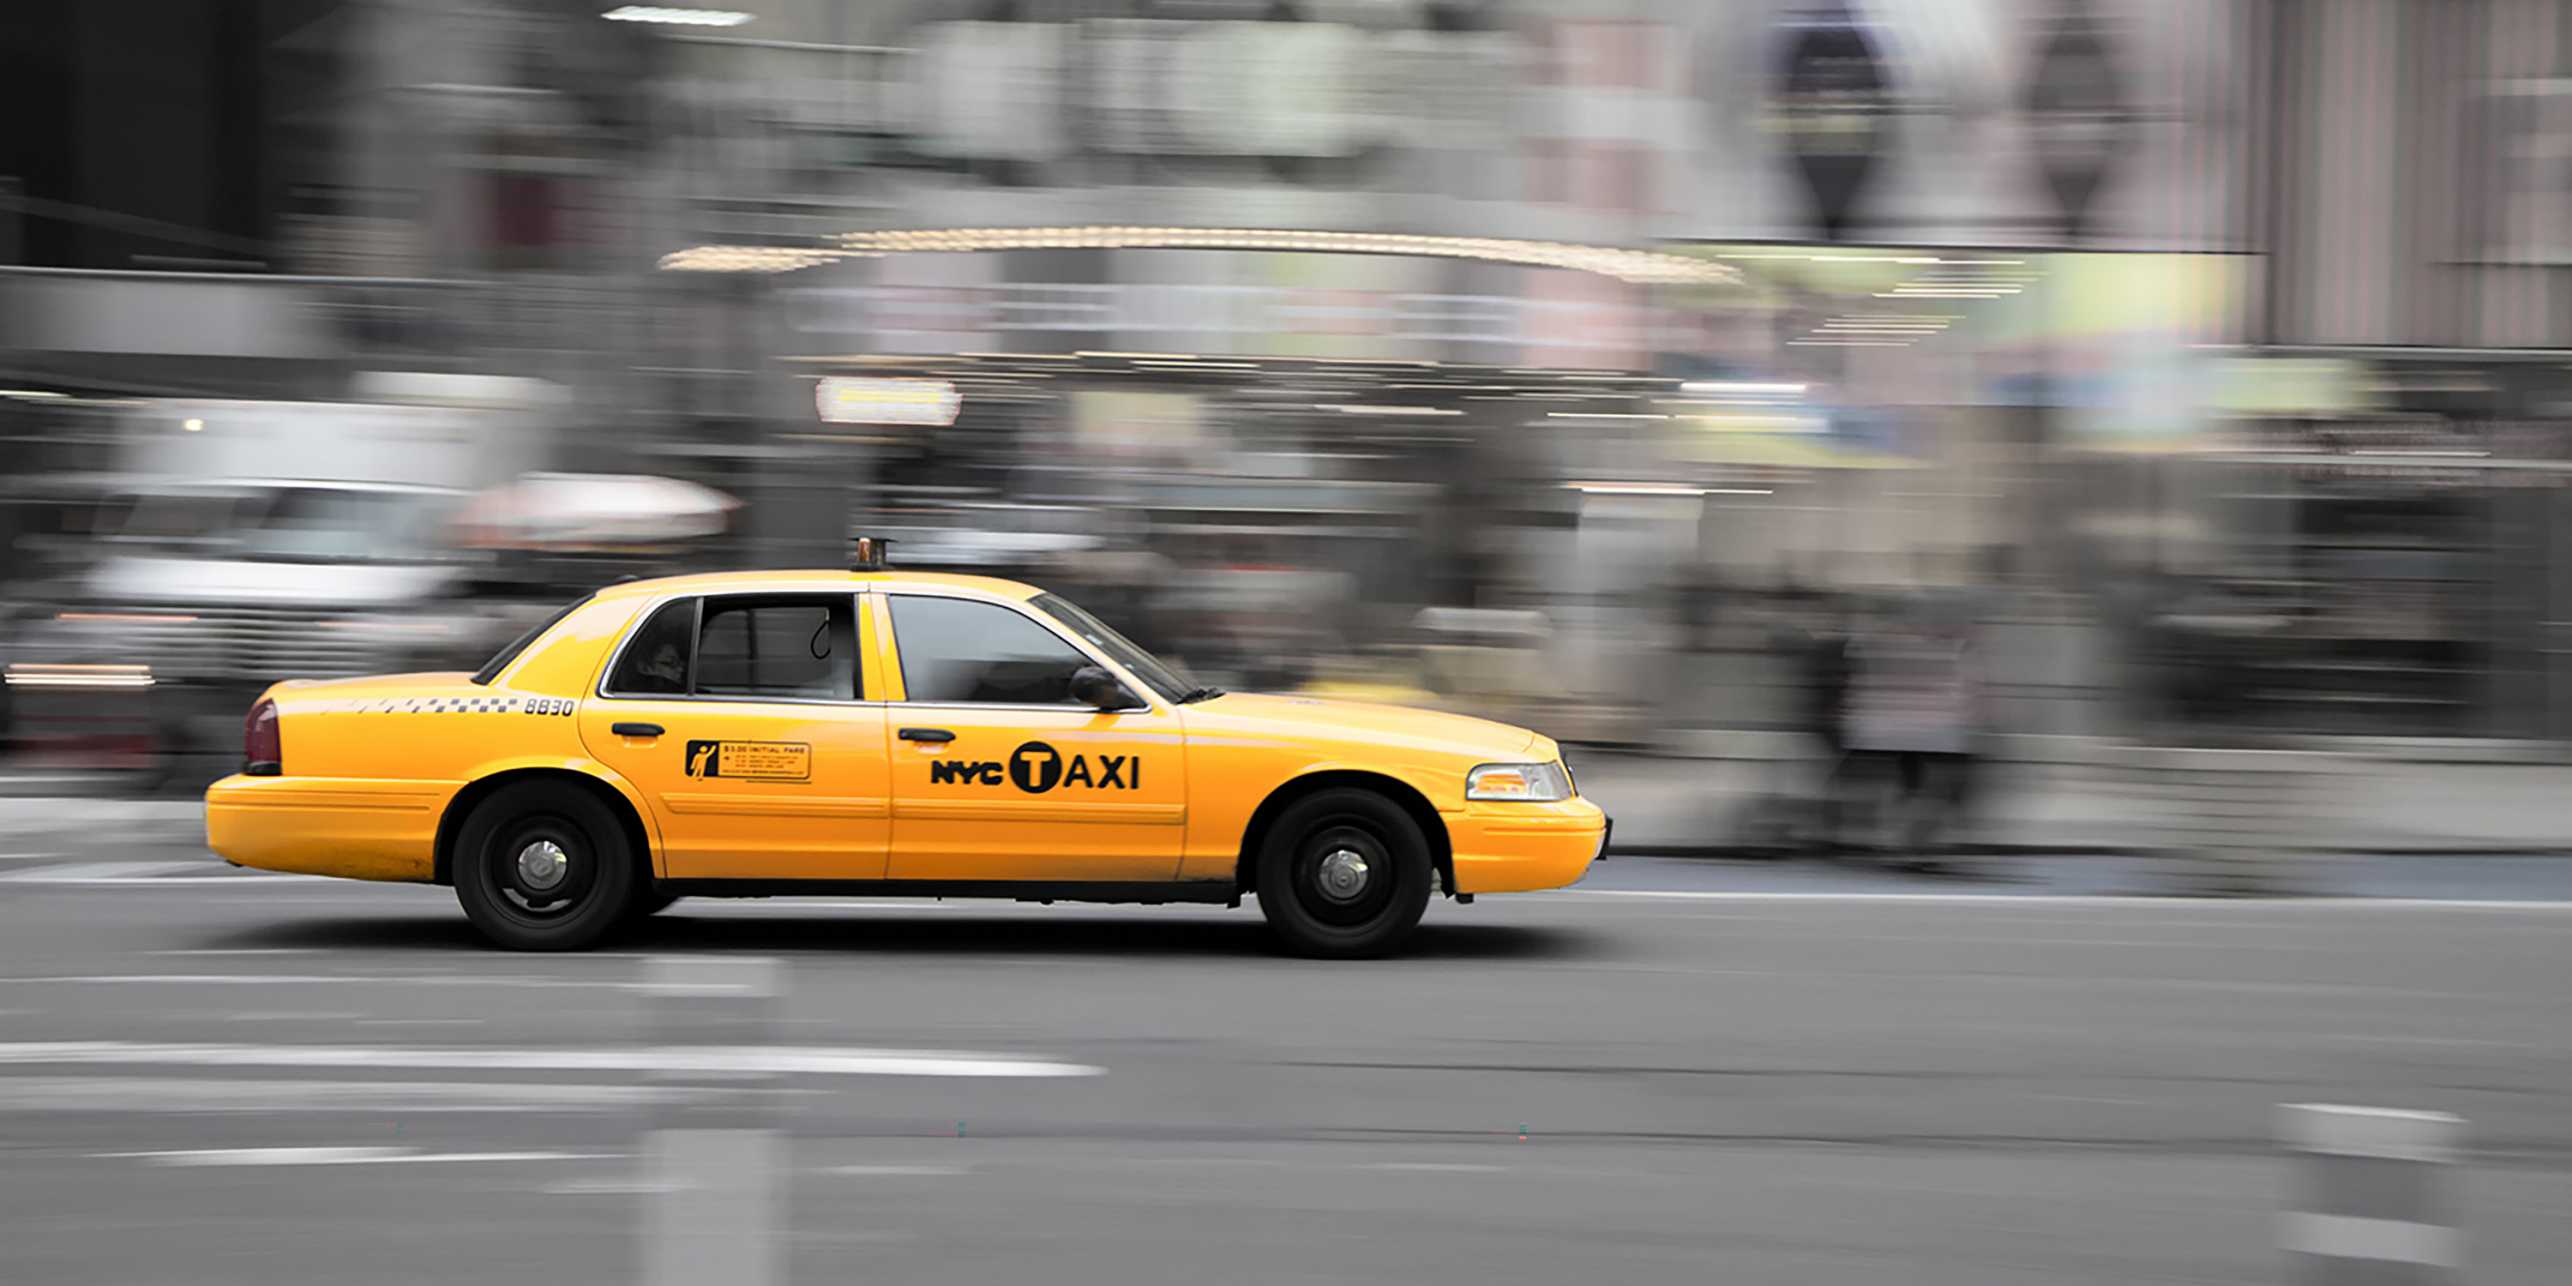 A yellow cab in the streets of New York